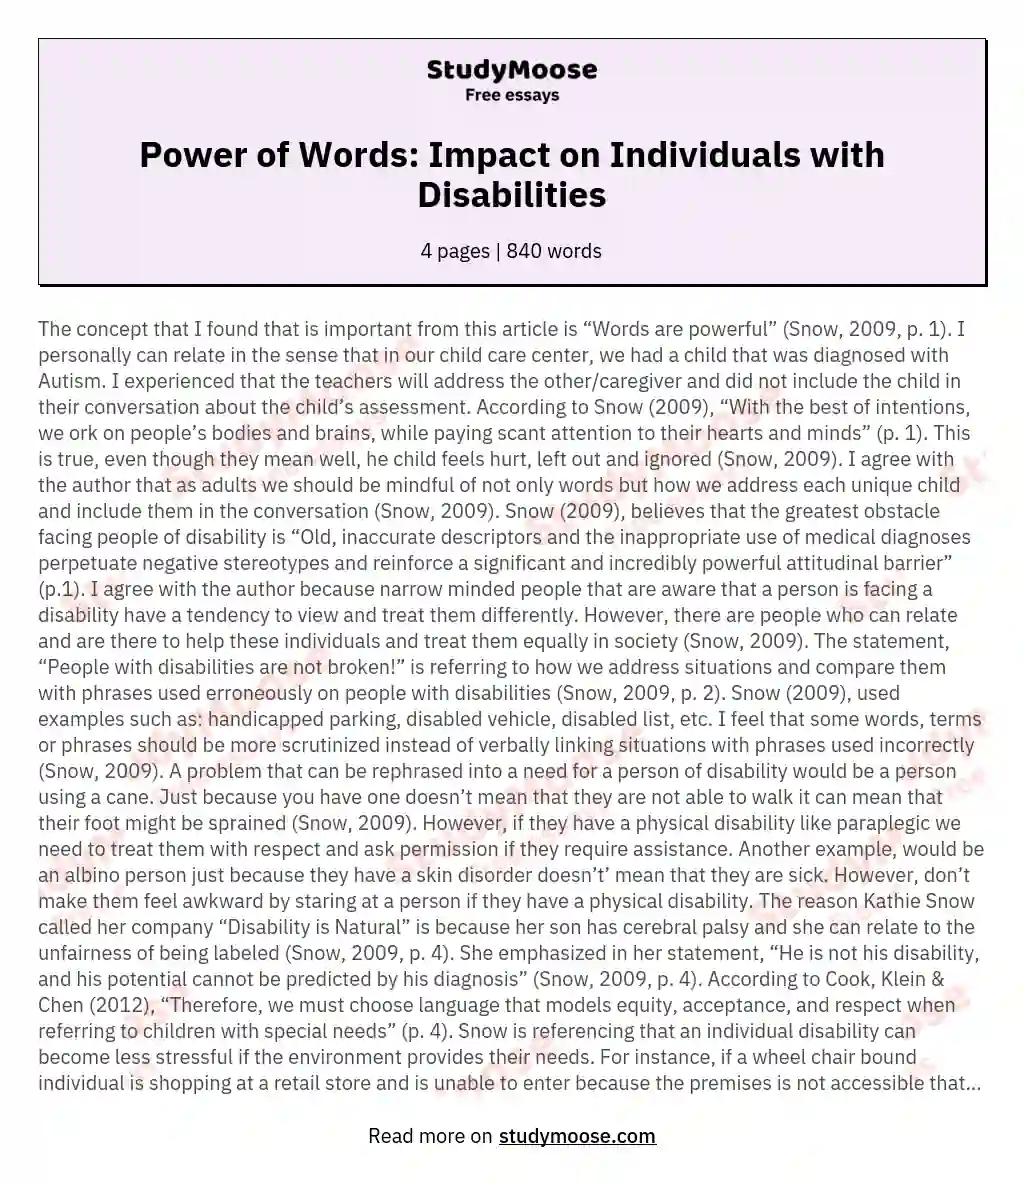 Power of Words: Impact on Individuals with Disabilities essay